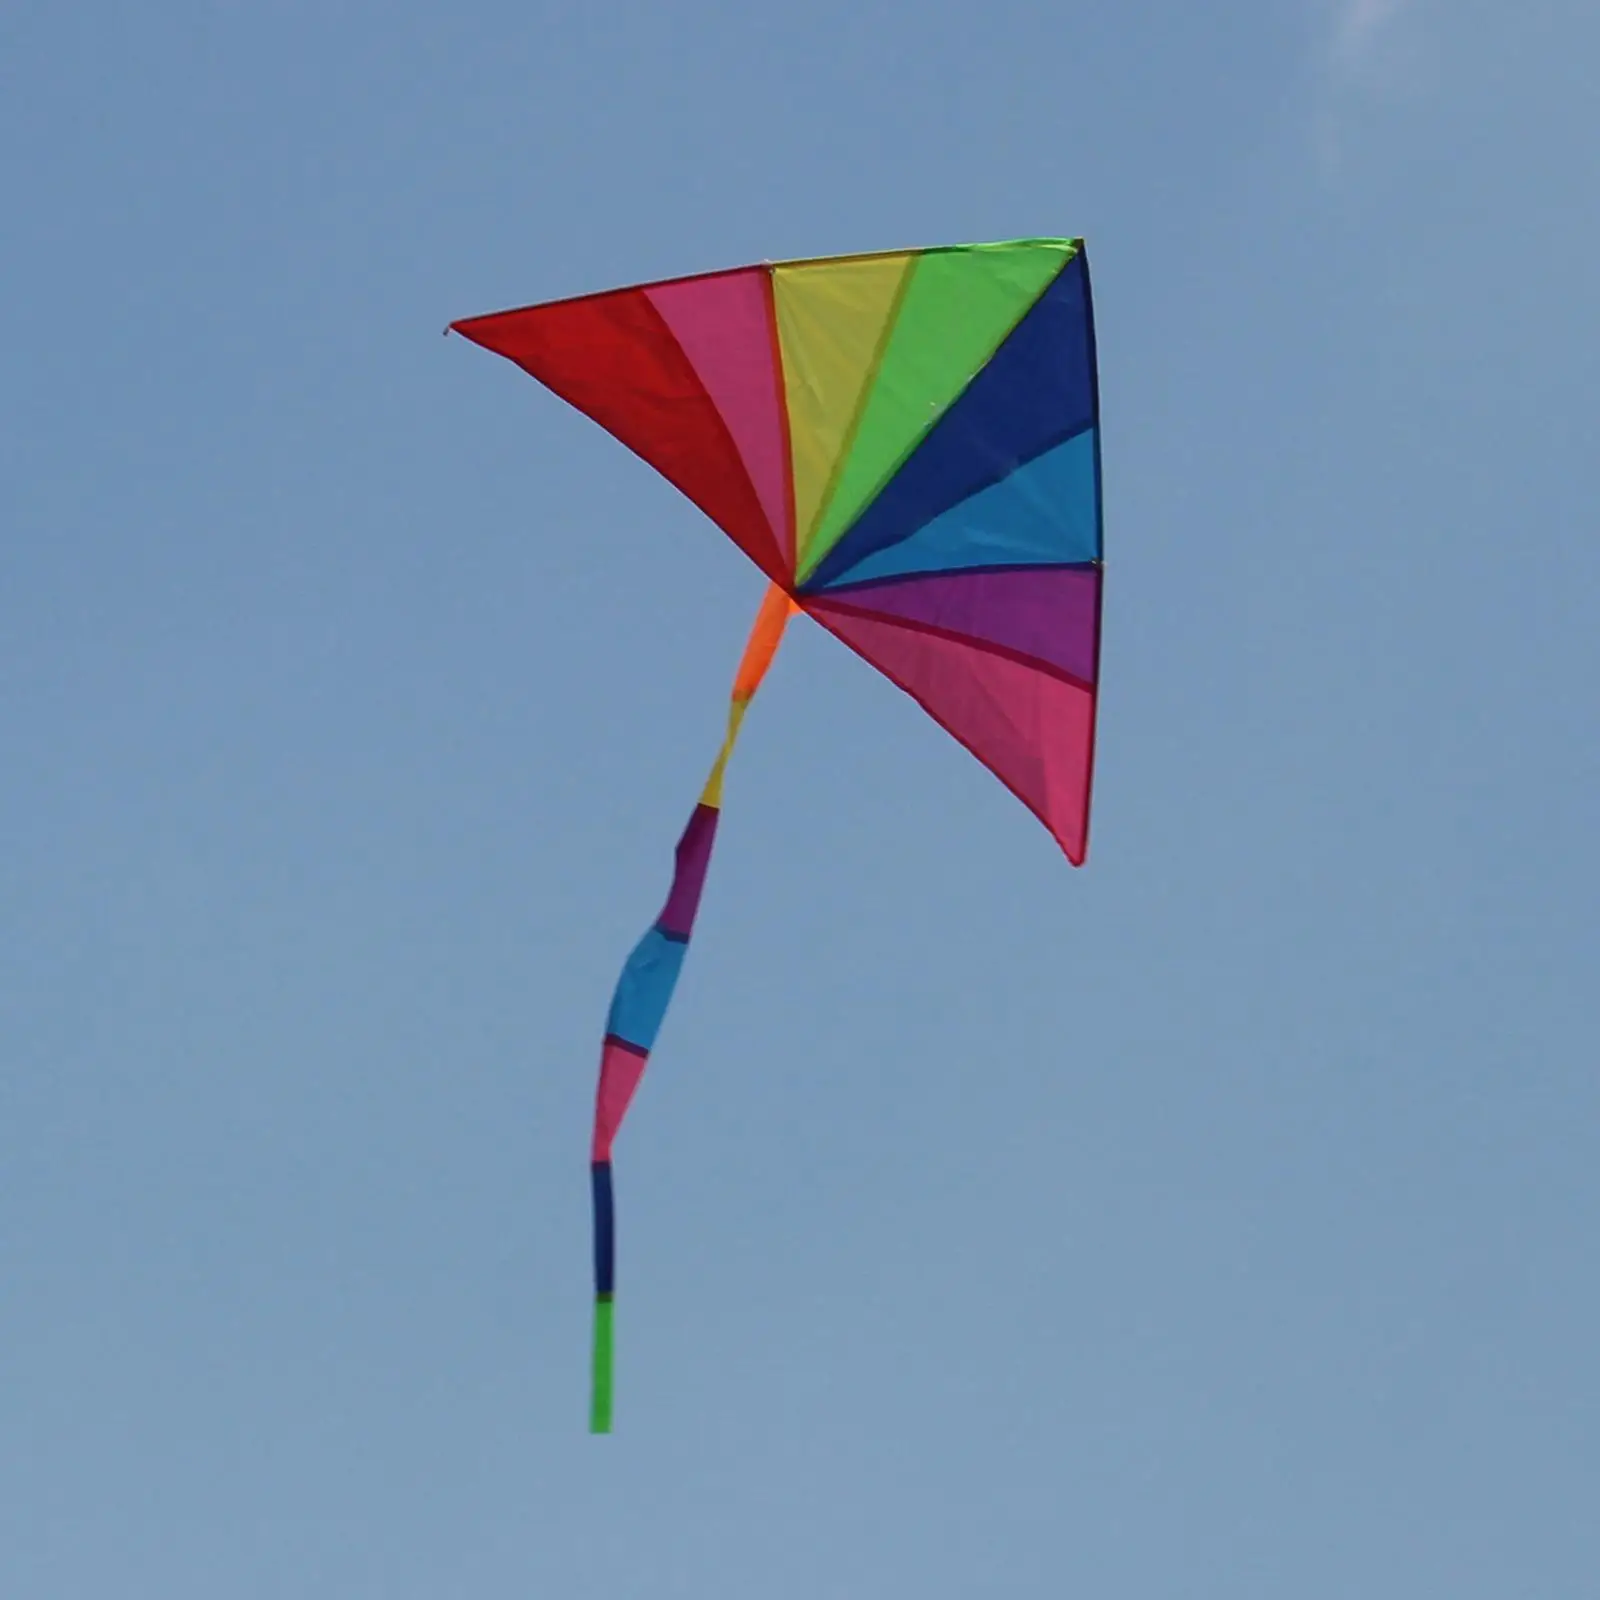 Large Rainbow Delta Kite with Long Colorful Tail for Children Outdoor Game Activities Beach Trip Great Gift Childhood